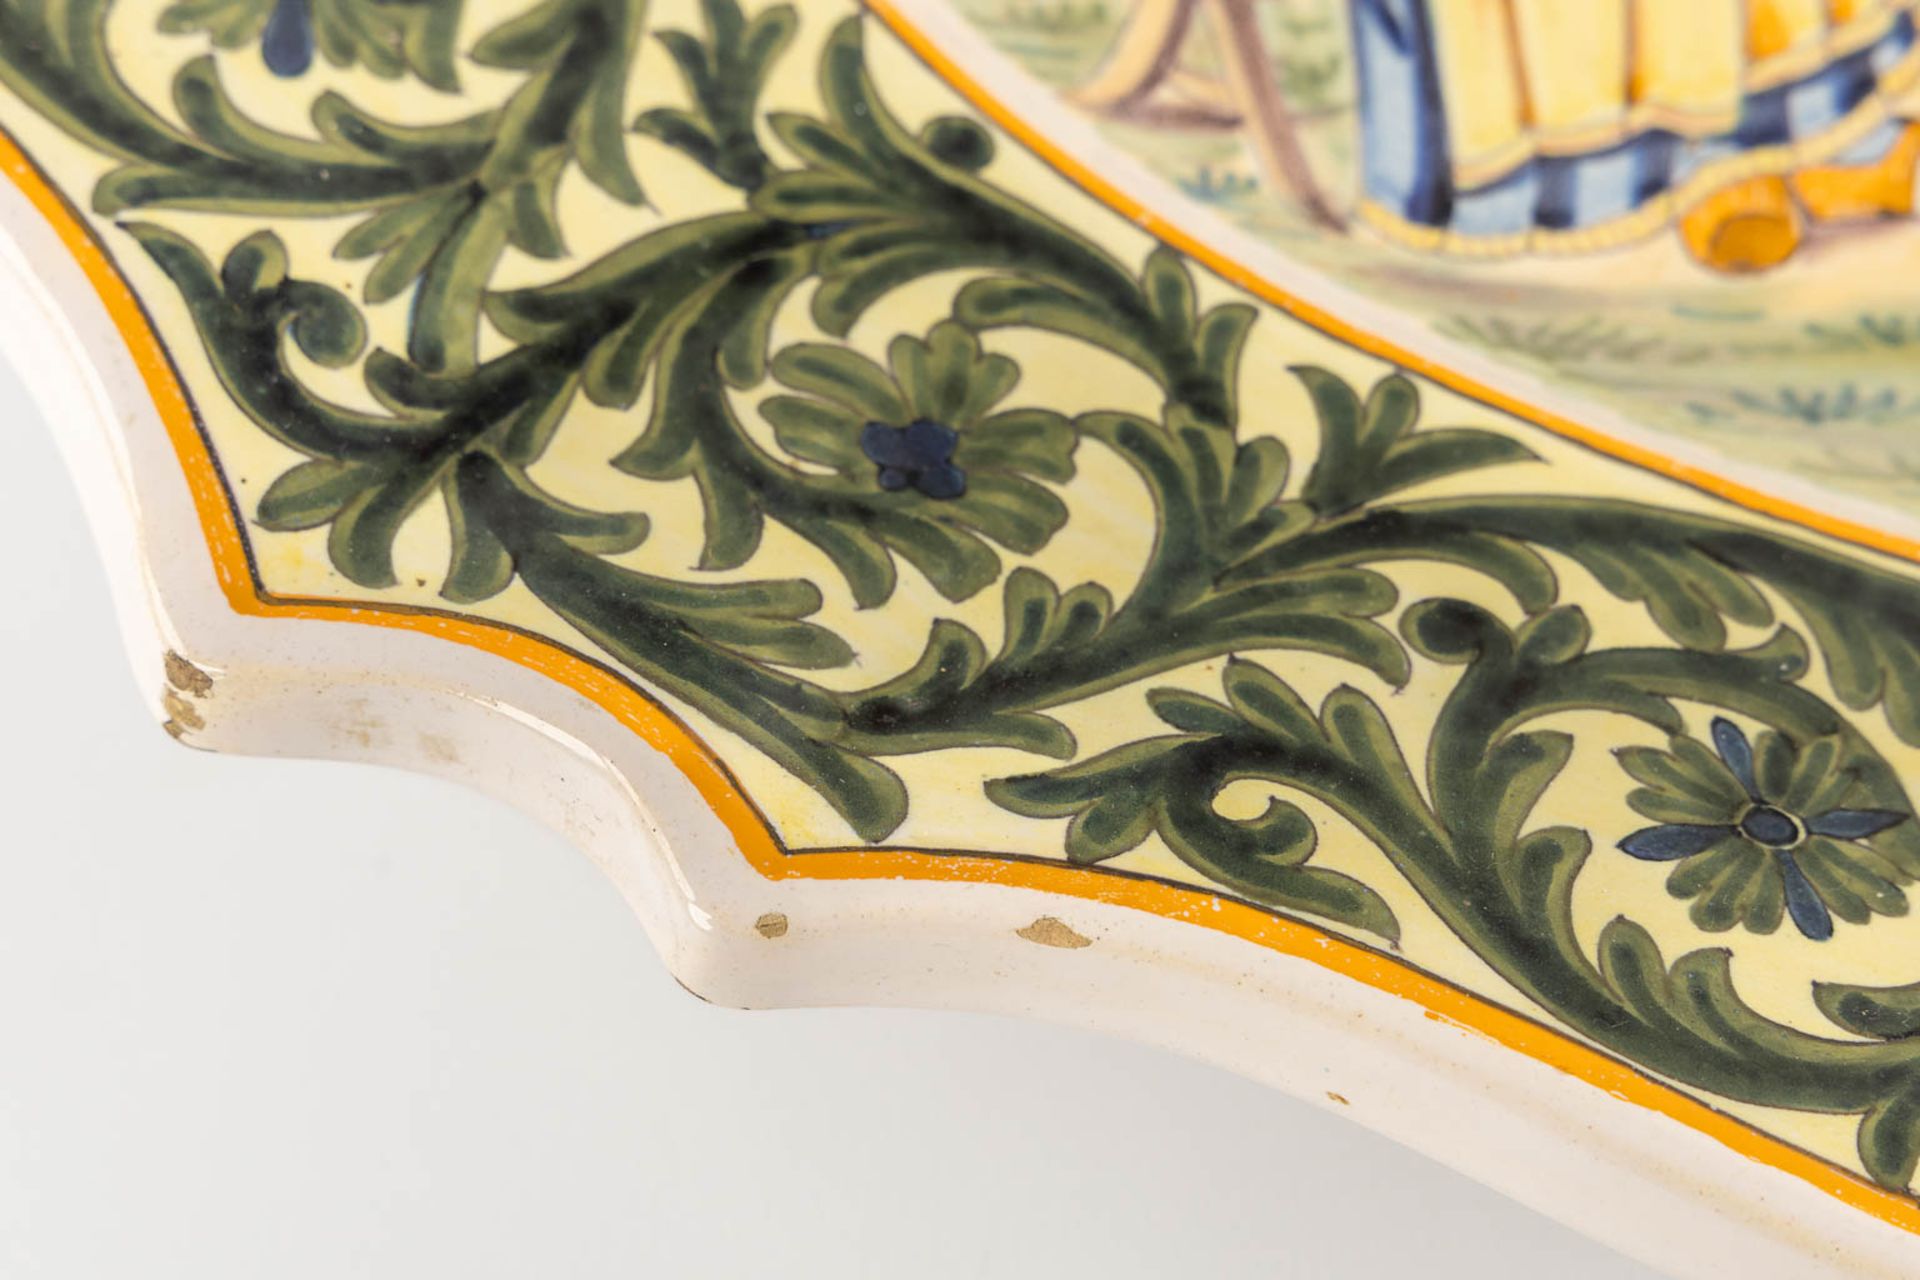 Henriot Quimper, a large faience serving platter with hand-painted decor. (L:48 x W:65 cm) - Image 12 of 14